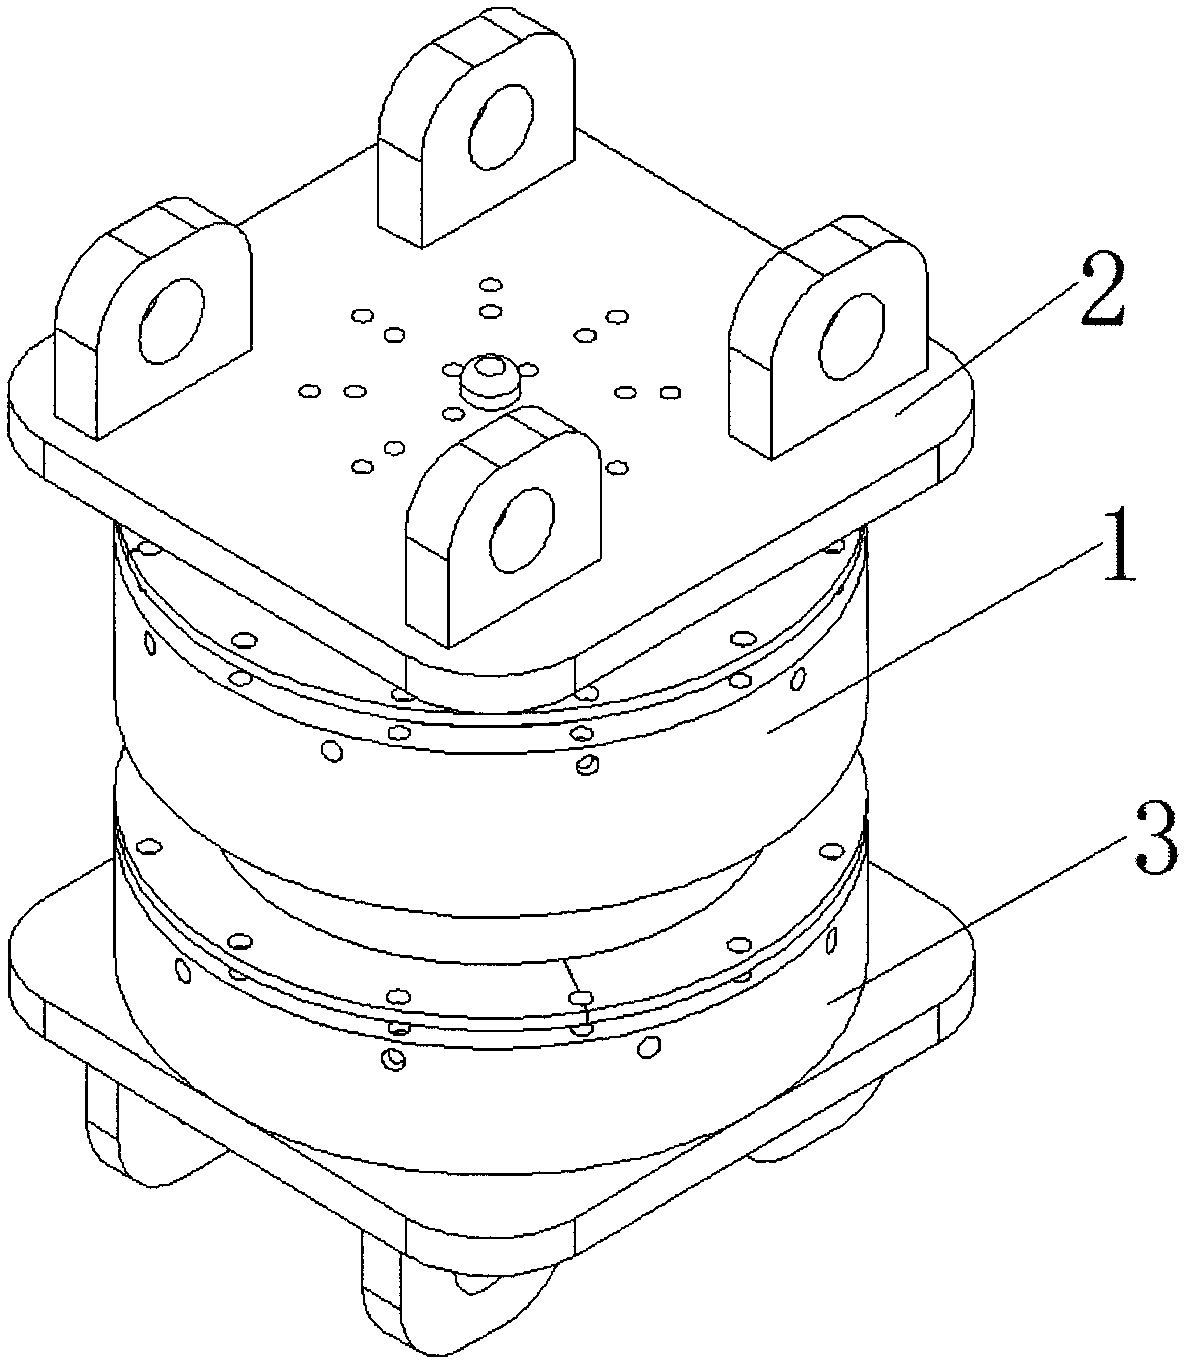 Damping connection arm for quartering hammer cantilever of excavator